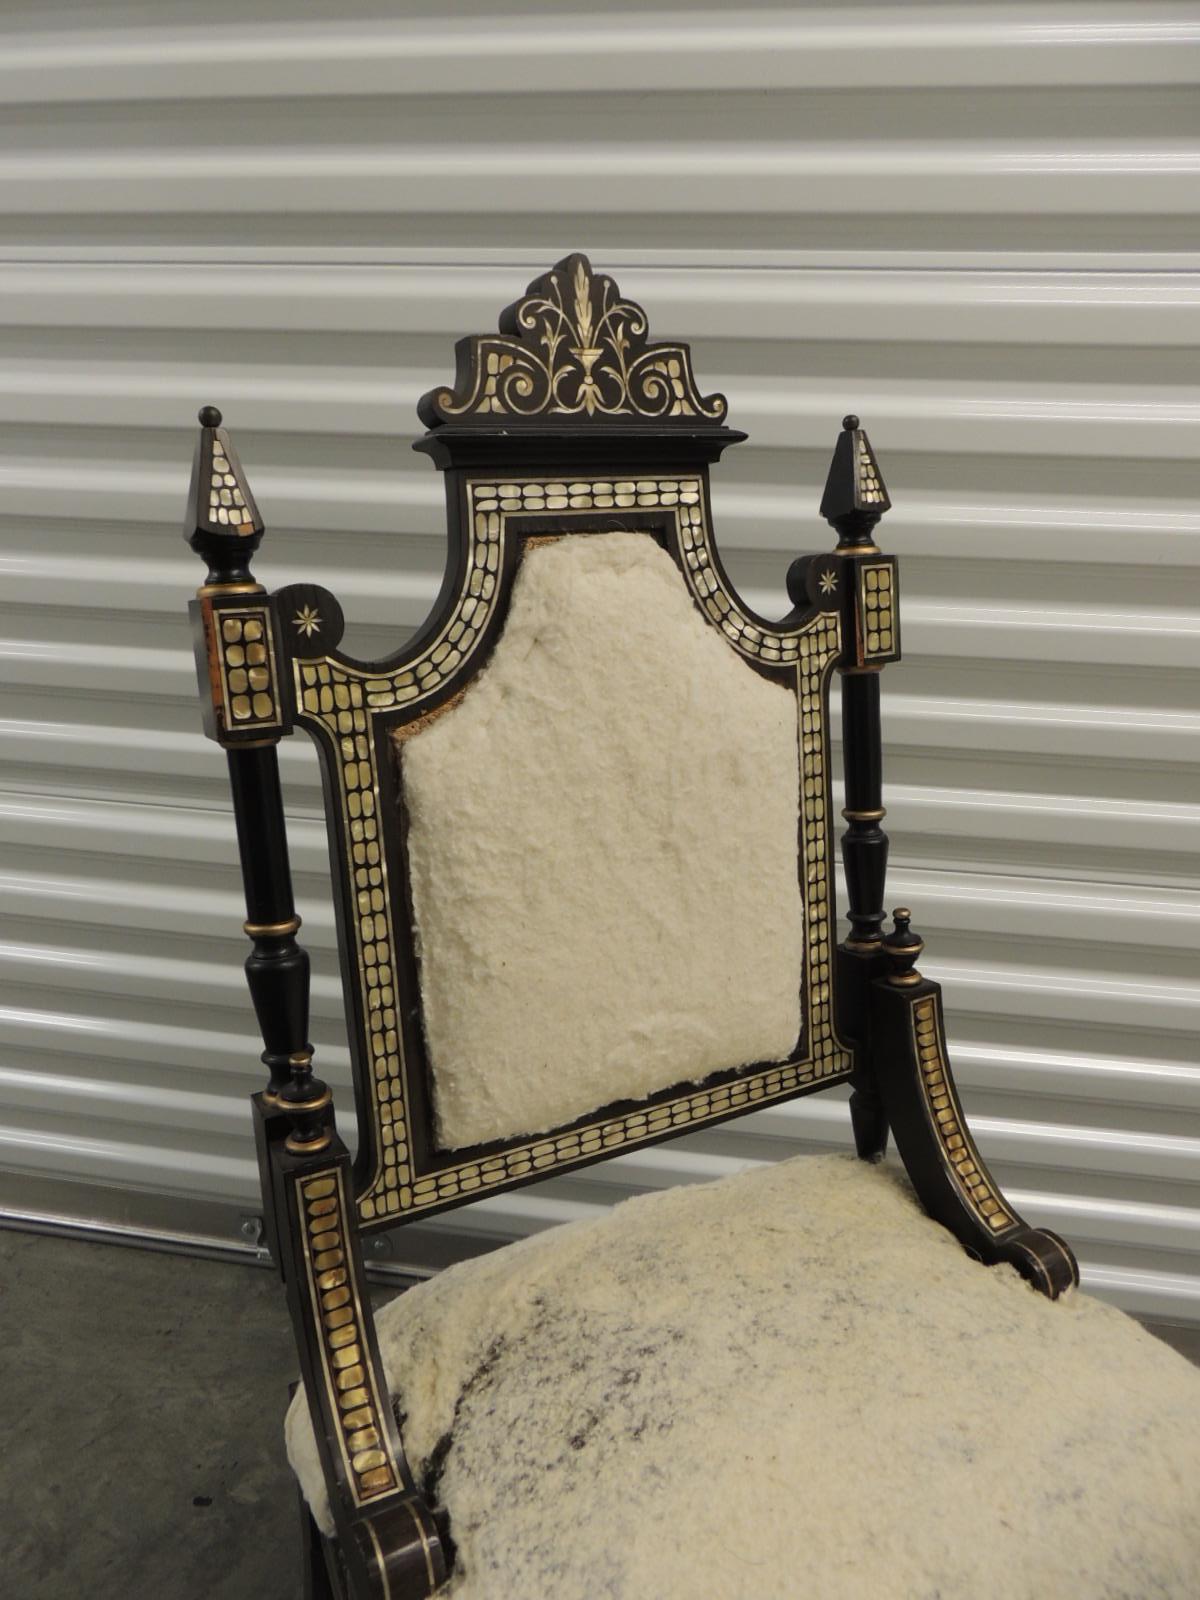 Antique Mother-of-Pearl inlaid Ebonized Wood Side Chair/Slipper chair.
Ebonized wood and gold painted details. Hand carved details.
Original horse hair and batting material.
Sturdy frame. SOLD AS IS.
If you wish to have it re-upholster with your